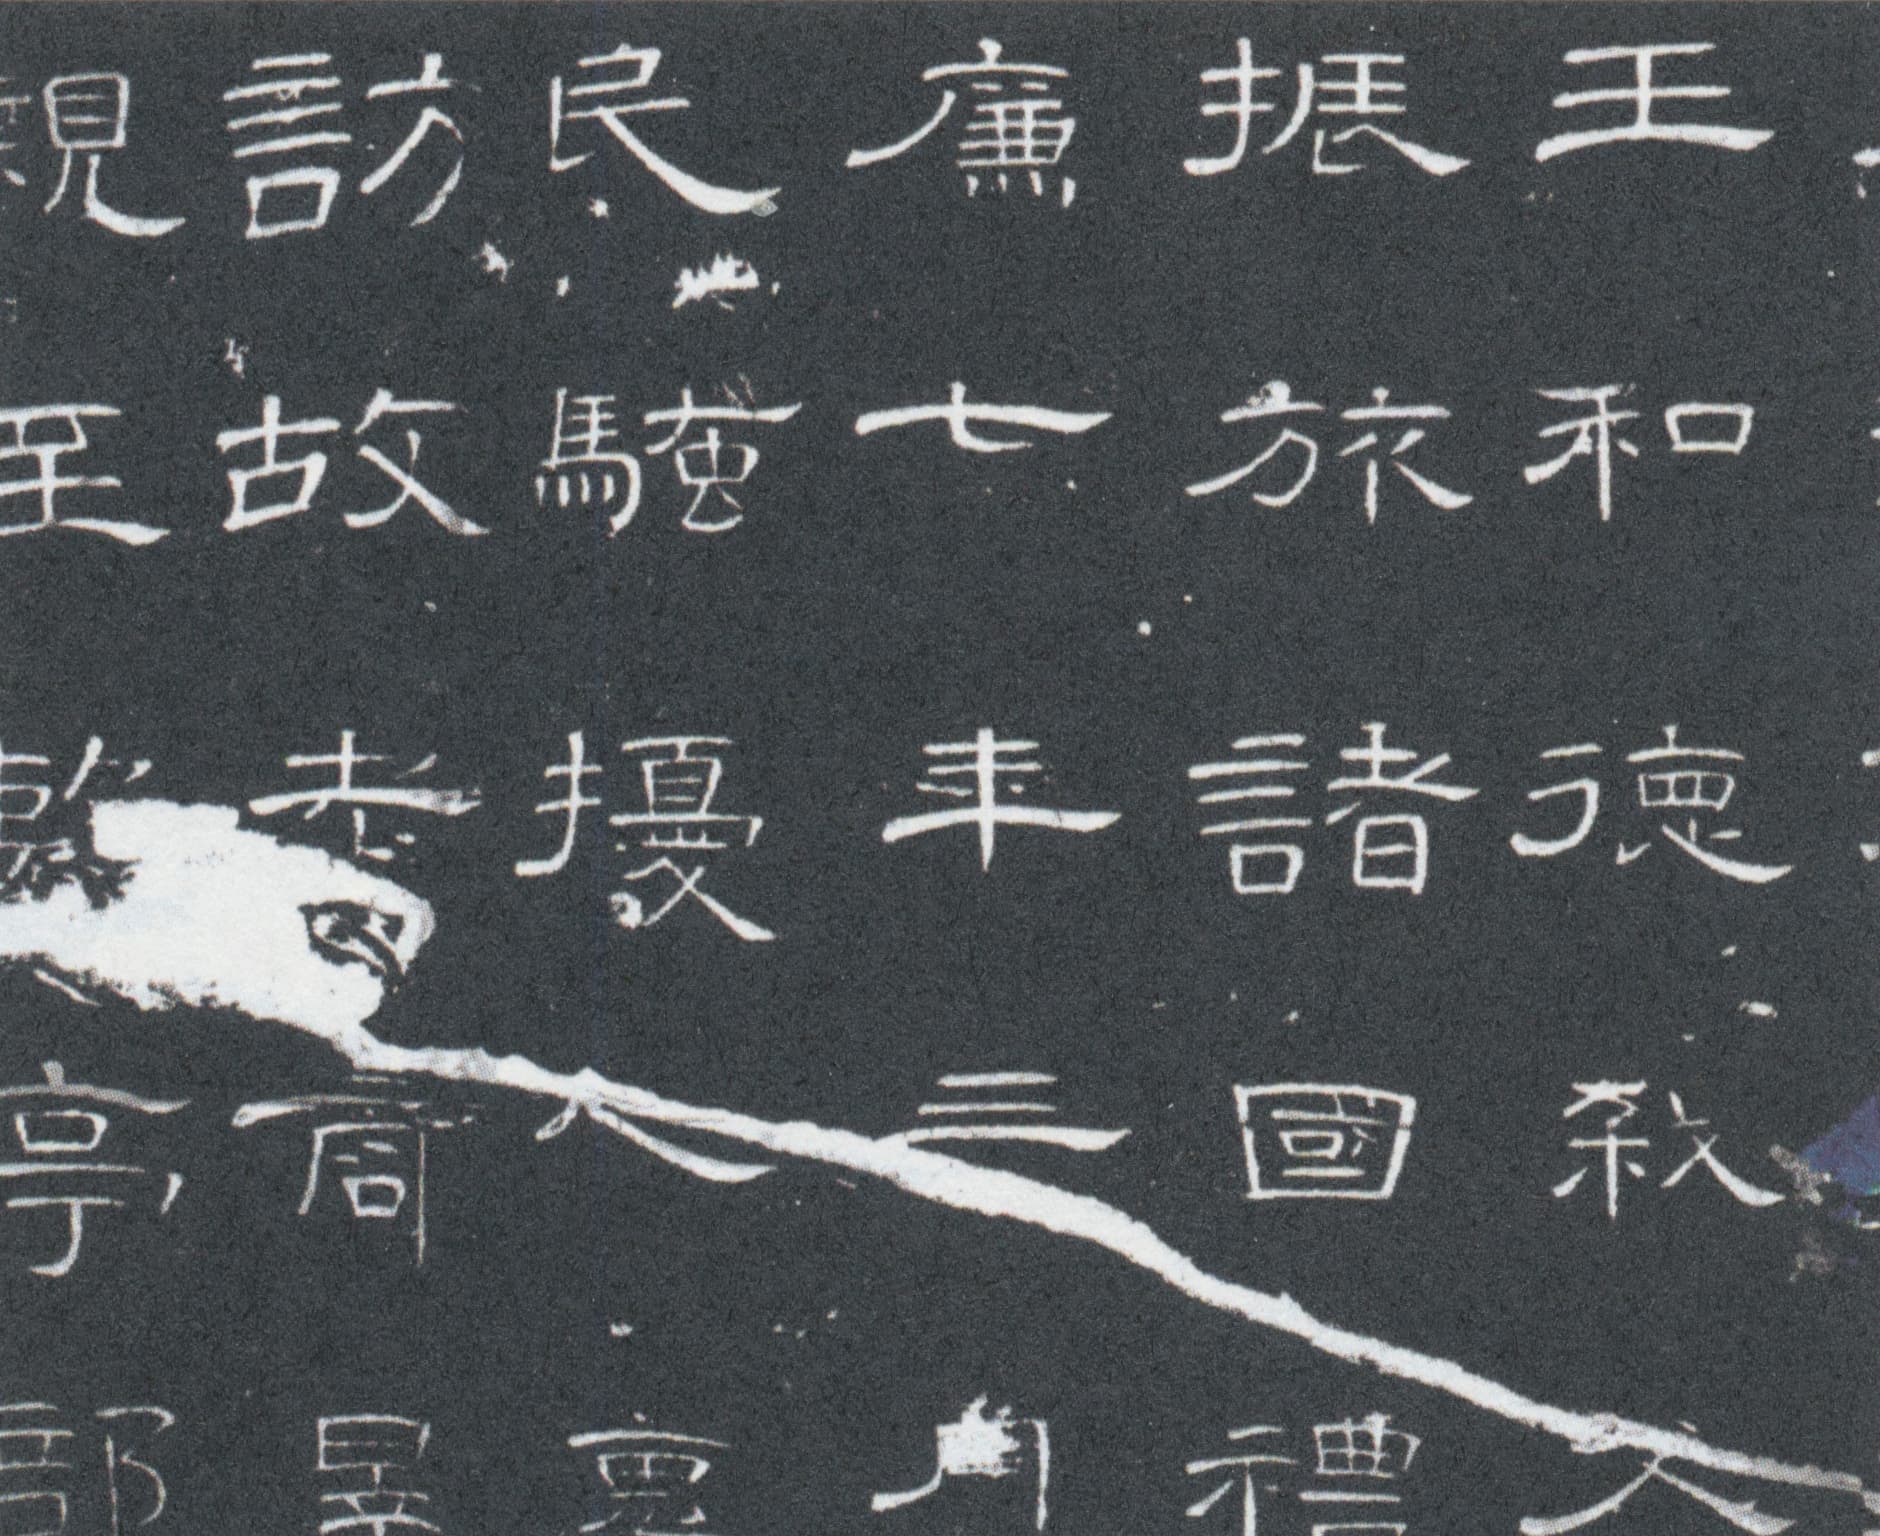 Extract from the Cao Quan Bei, or Cao Quan Stele, in Lishu calligraphic style